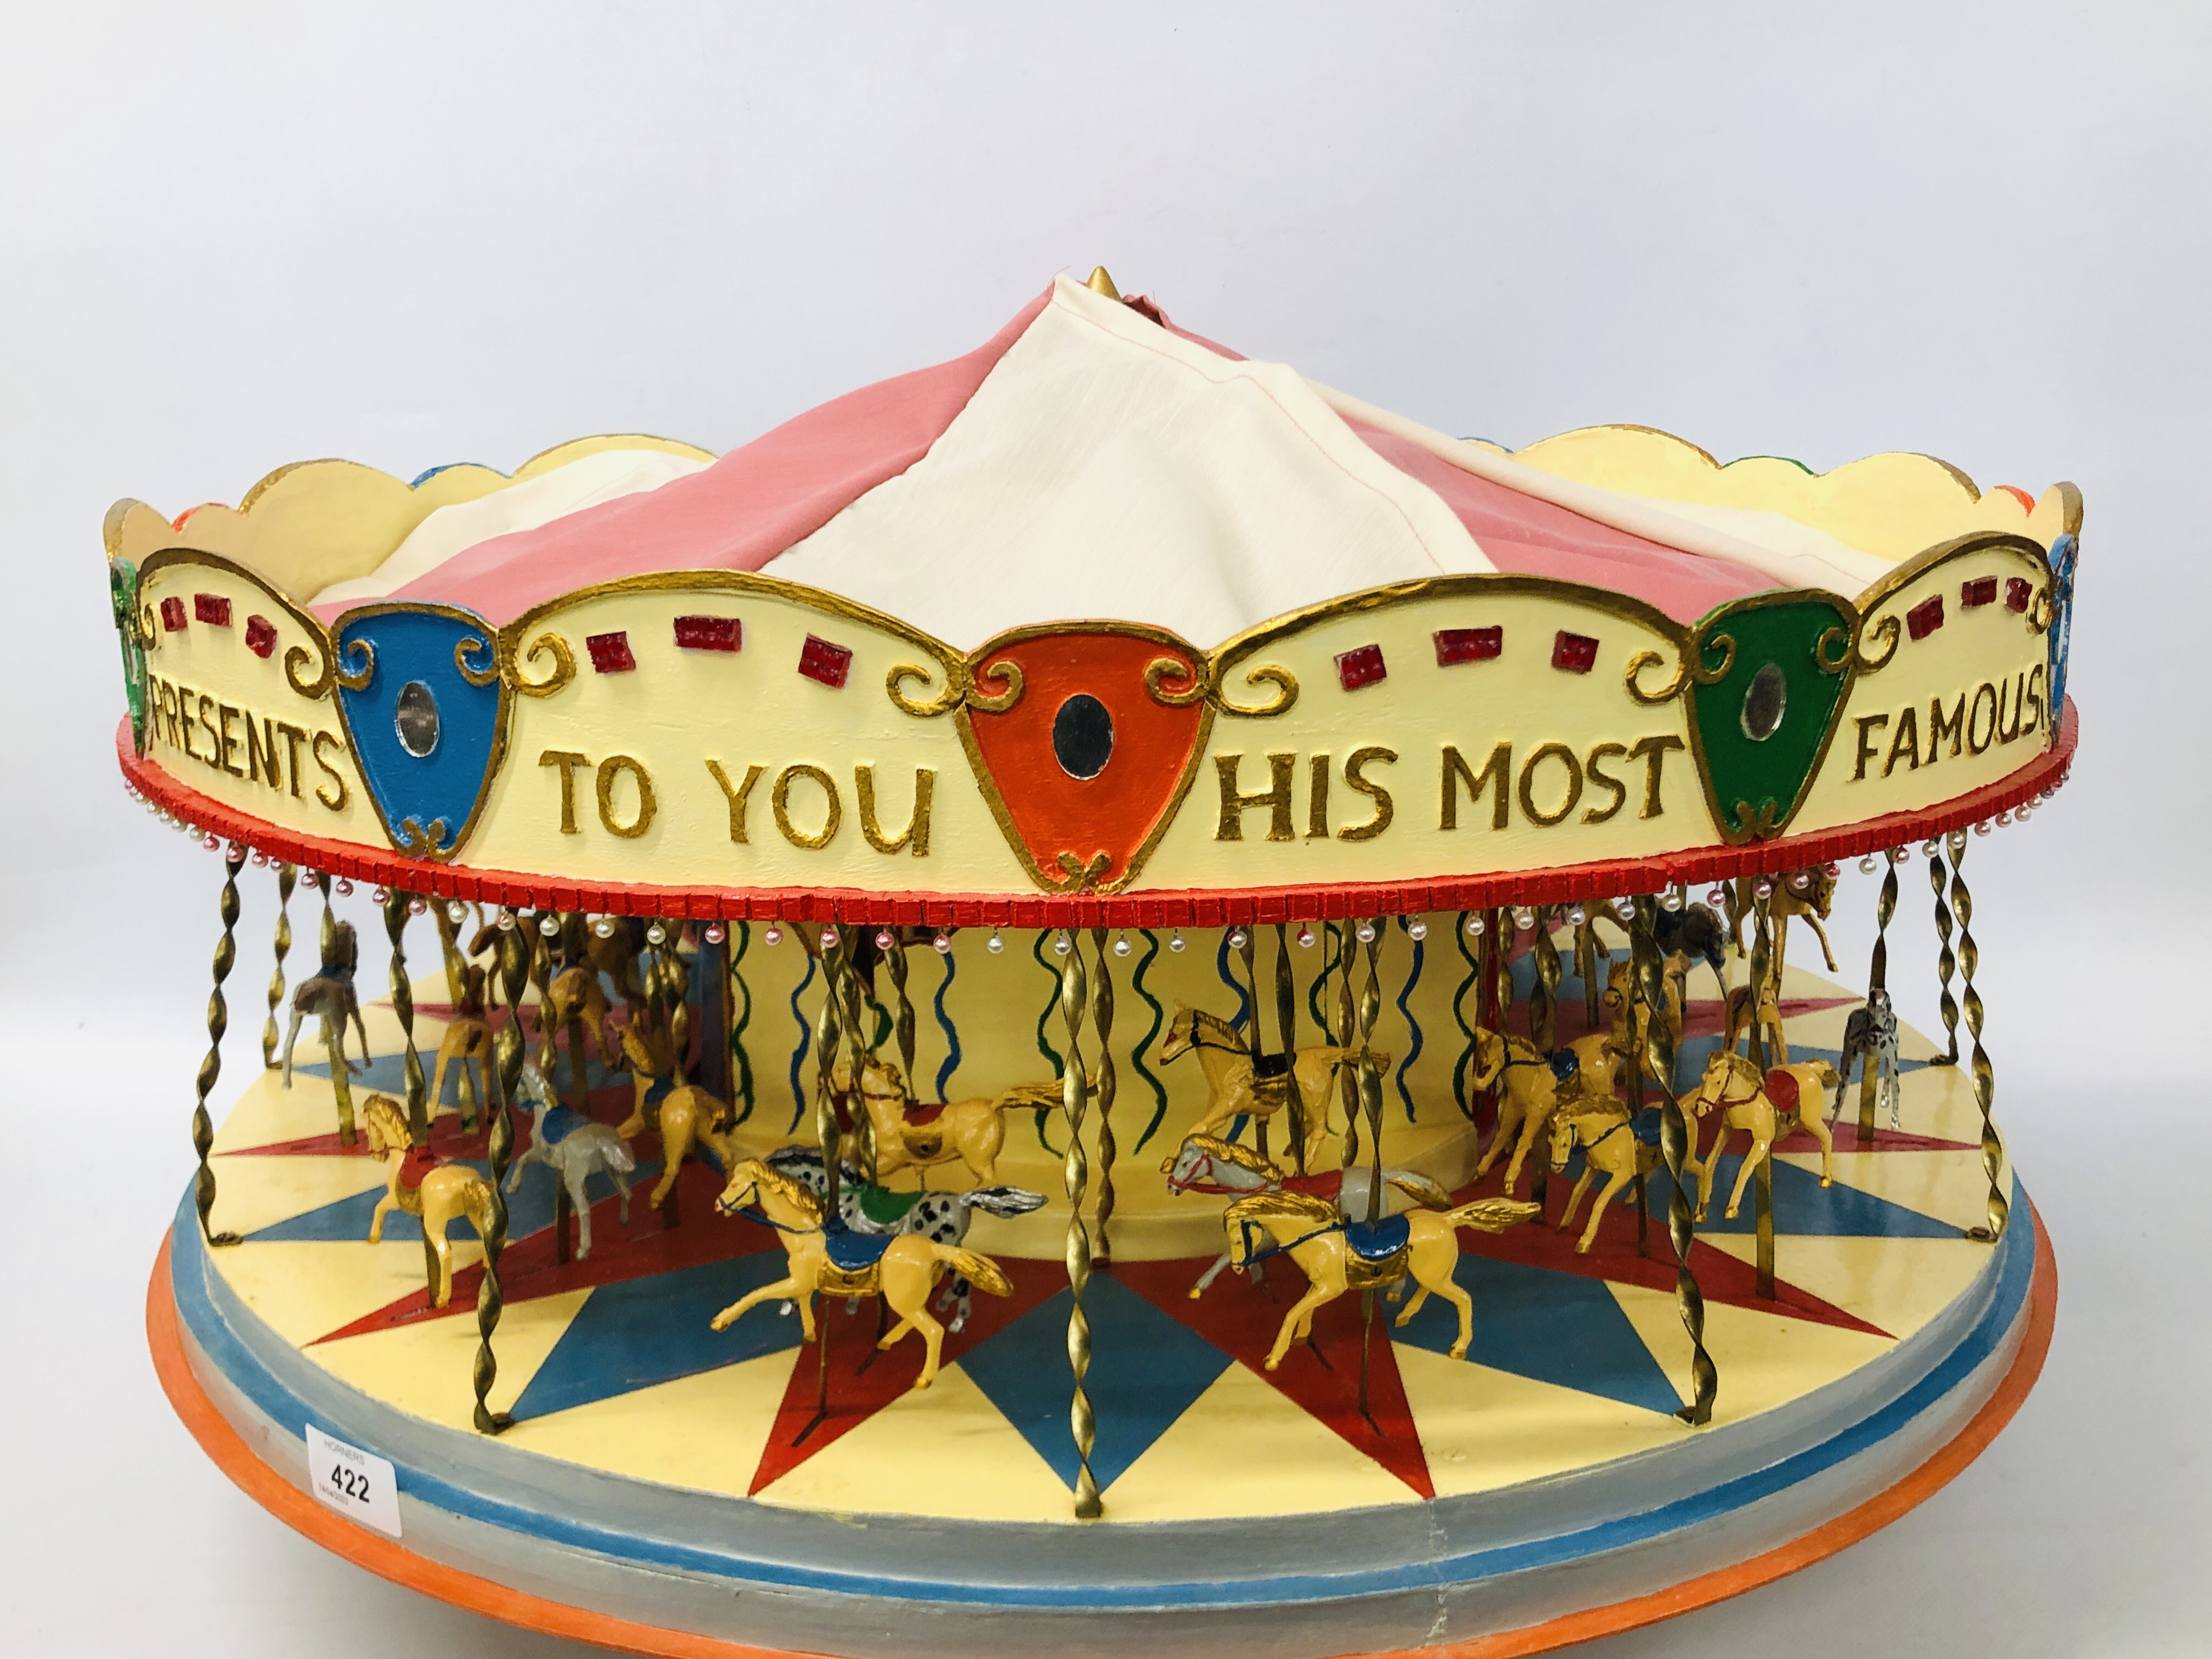 A VINTAGE HANDCRAFTED WOODEN MODEL OF A FAIRGROUND CAROUSEL WITH MOTORISED ACTION AND LIGHTS - - Image 5 of 10